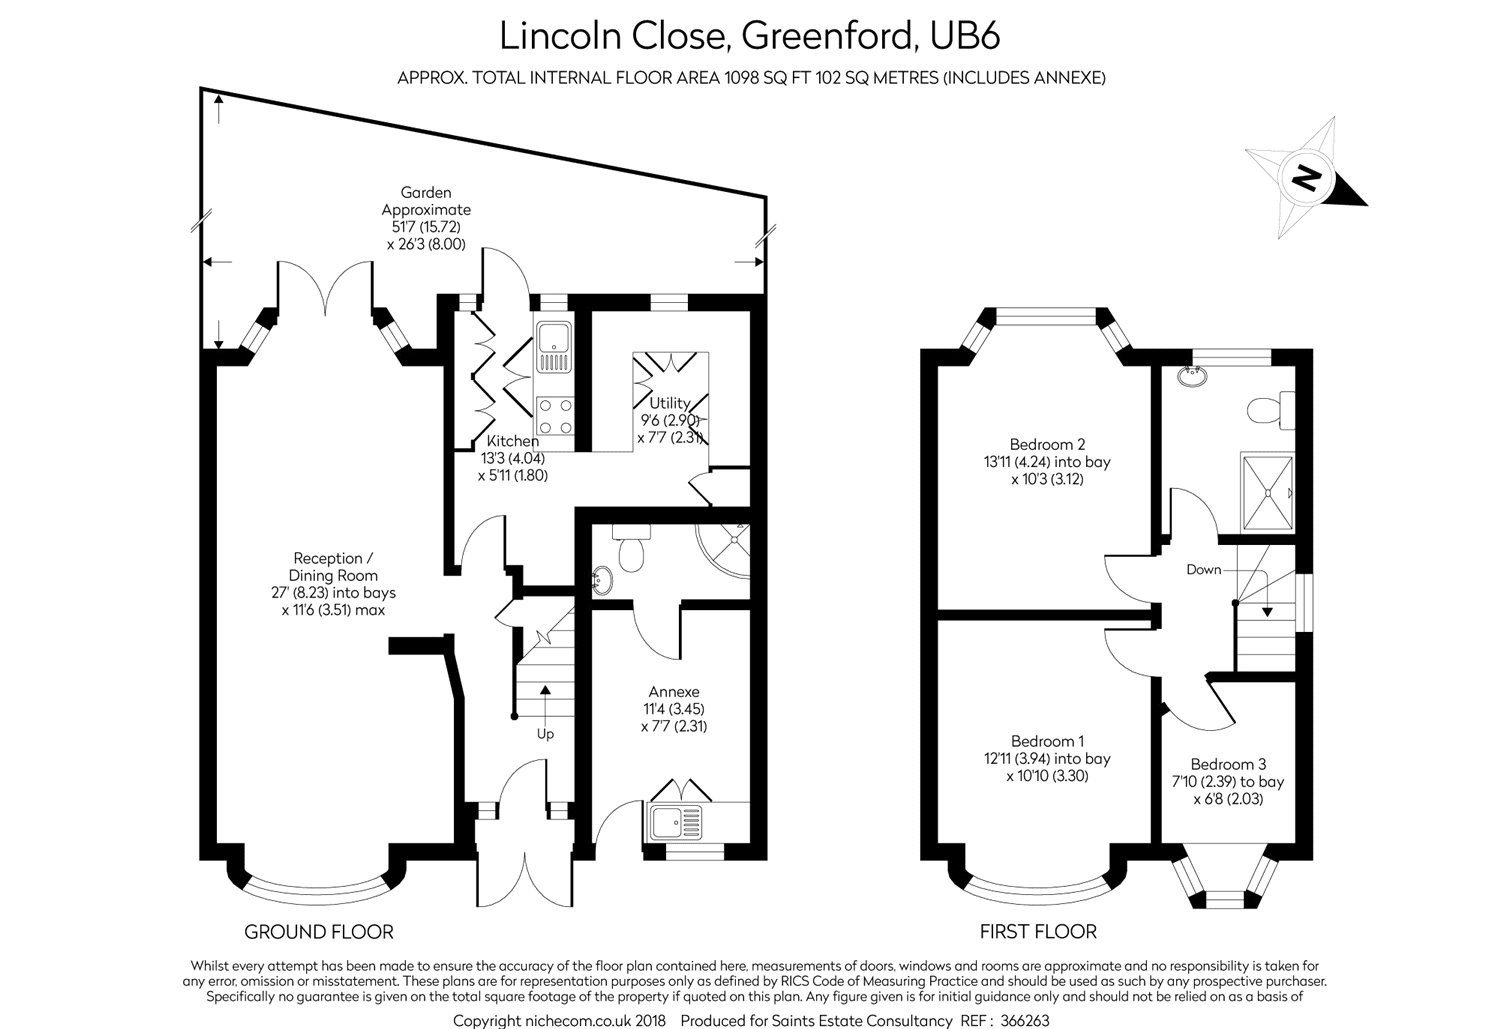 3 Bedrooms Semi-detached house for sale in Lincoln Close, Greenford UB6